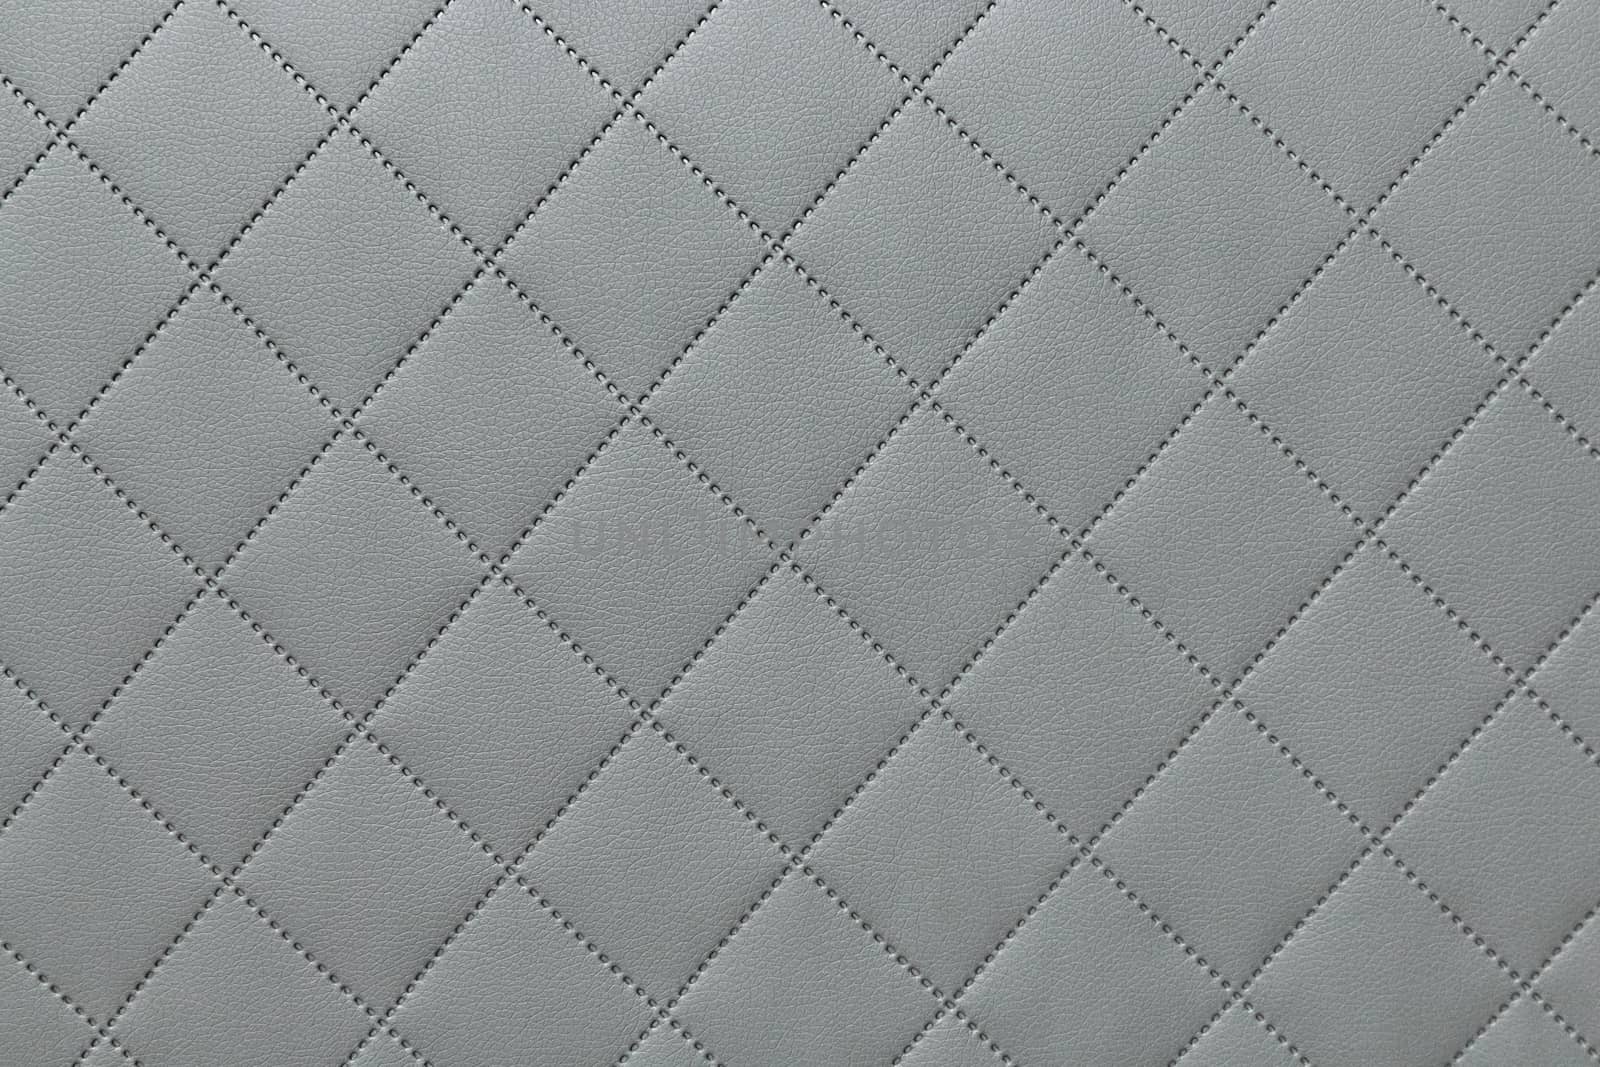 detail of sewn leather, gray leather upholstery background pattern